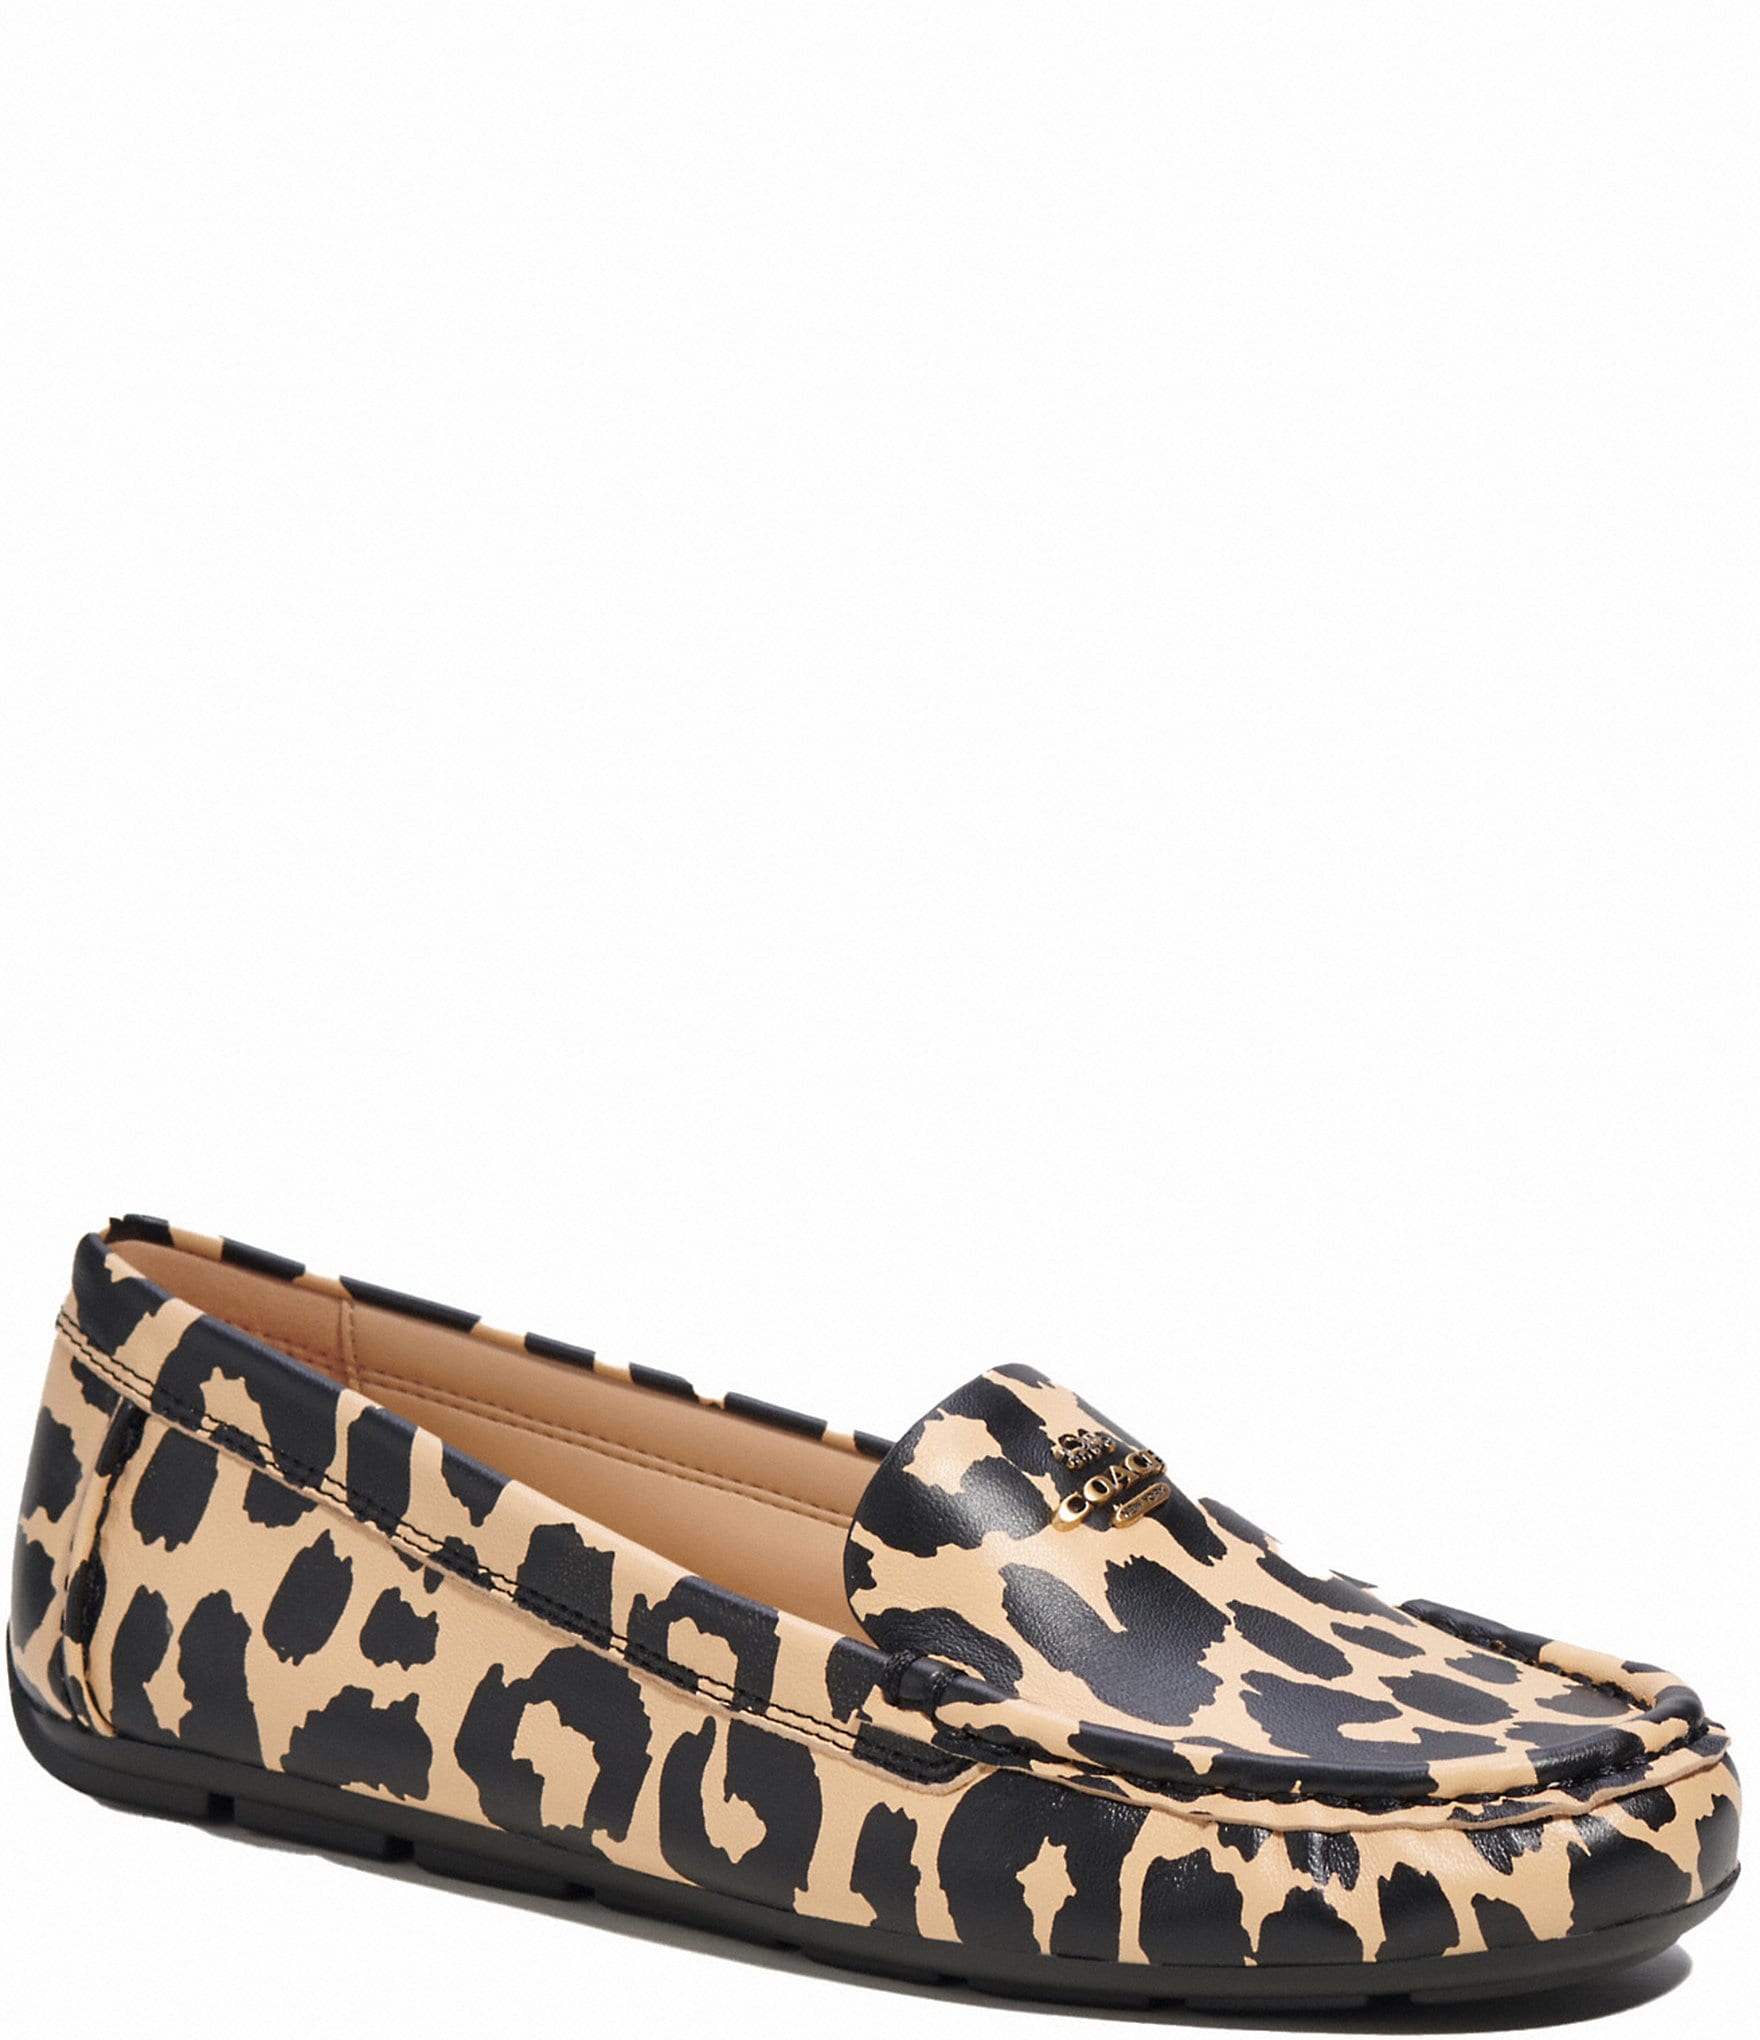 COACH Marley Leather Leopard Slip-On Drivers